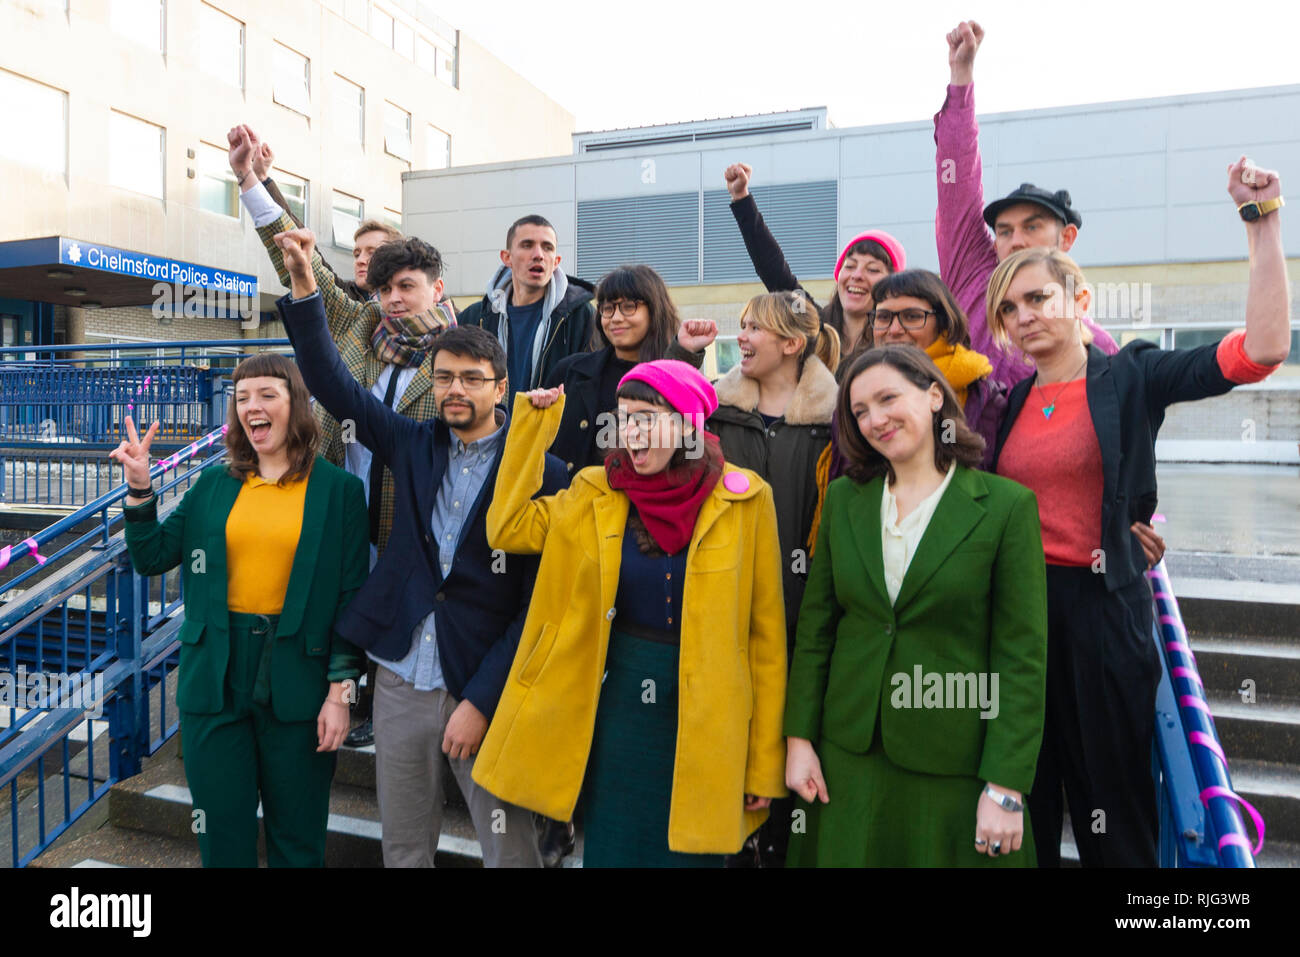 The sentencing of 15 protesters who blocked a deportation flight and disrupted operations at Stansted Airport on 28 March 2017 has taken place at Chelmsford Crown Court and they have avoided jail sentences. Protesters had gathered outside the court demonstrating against their convictions Stock Photo